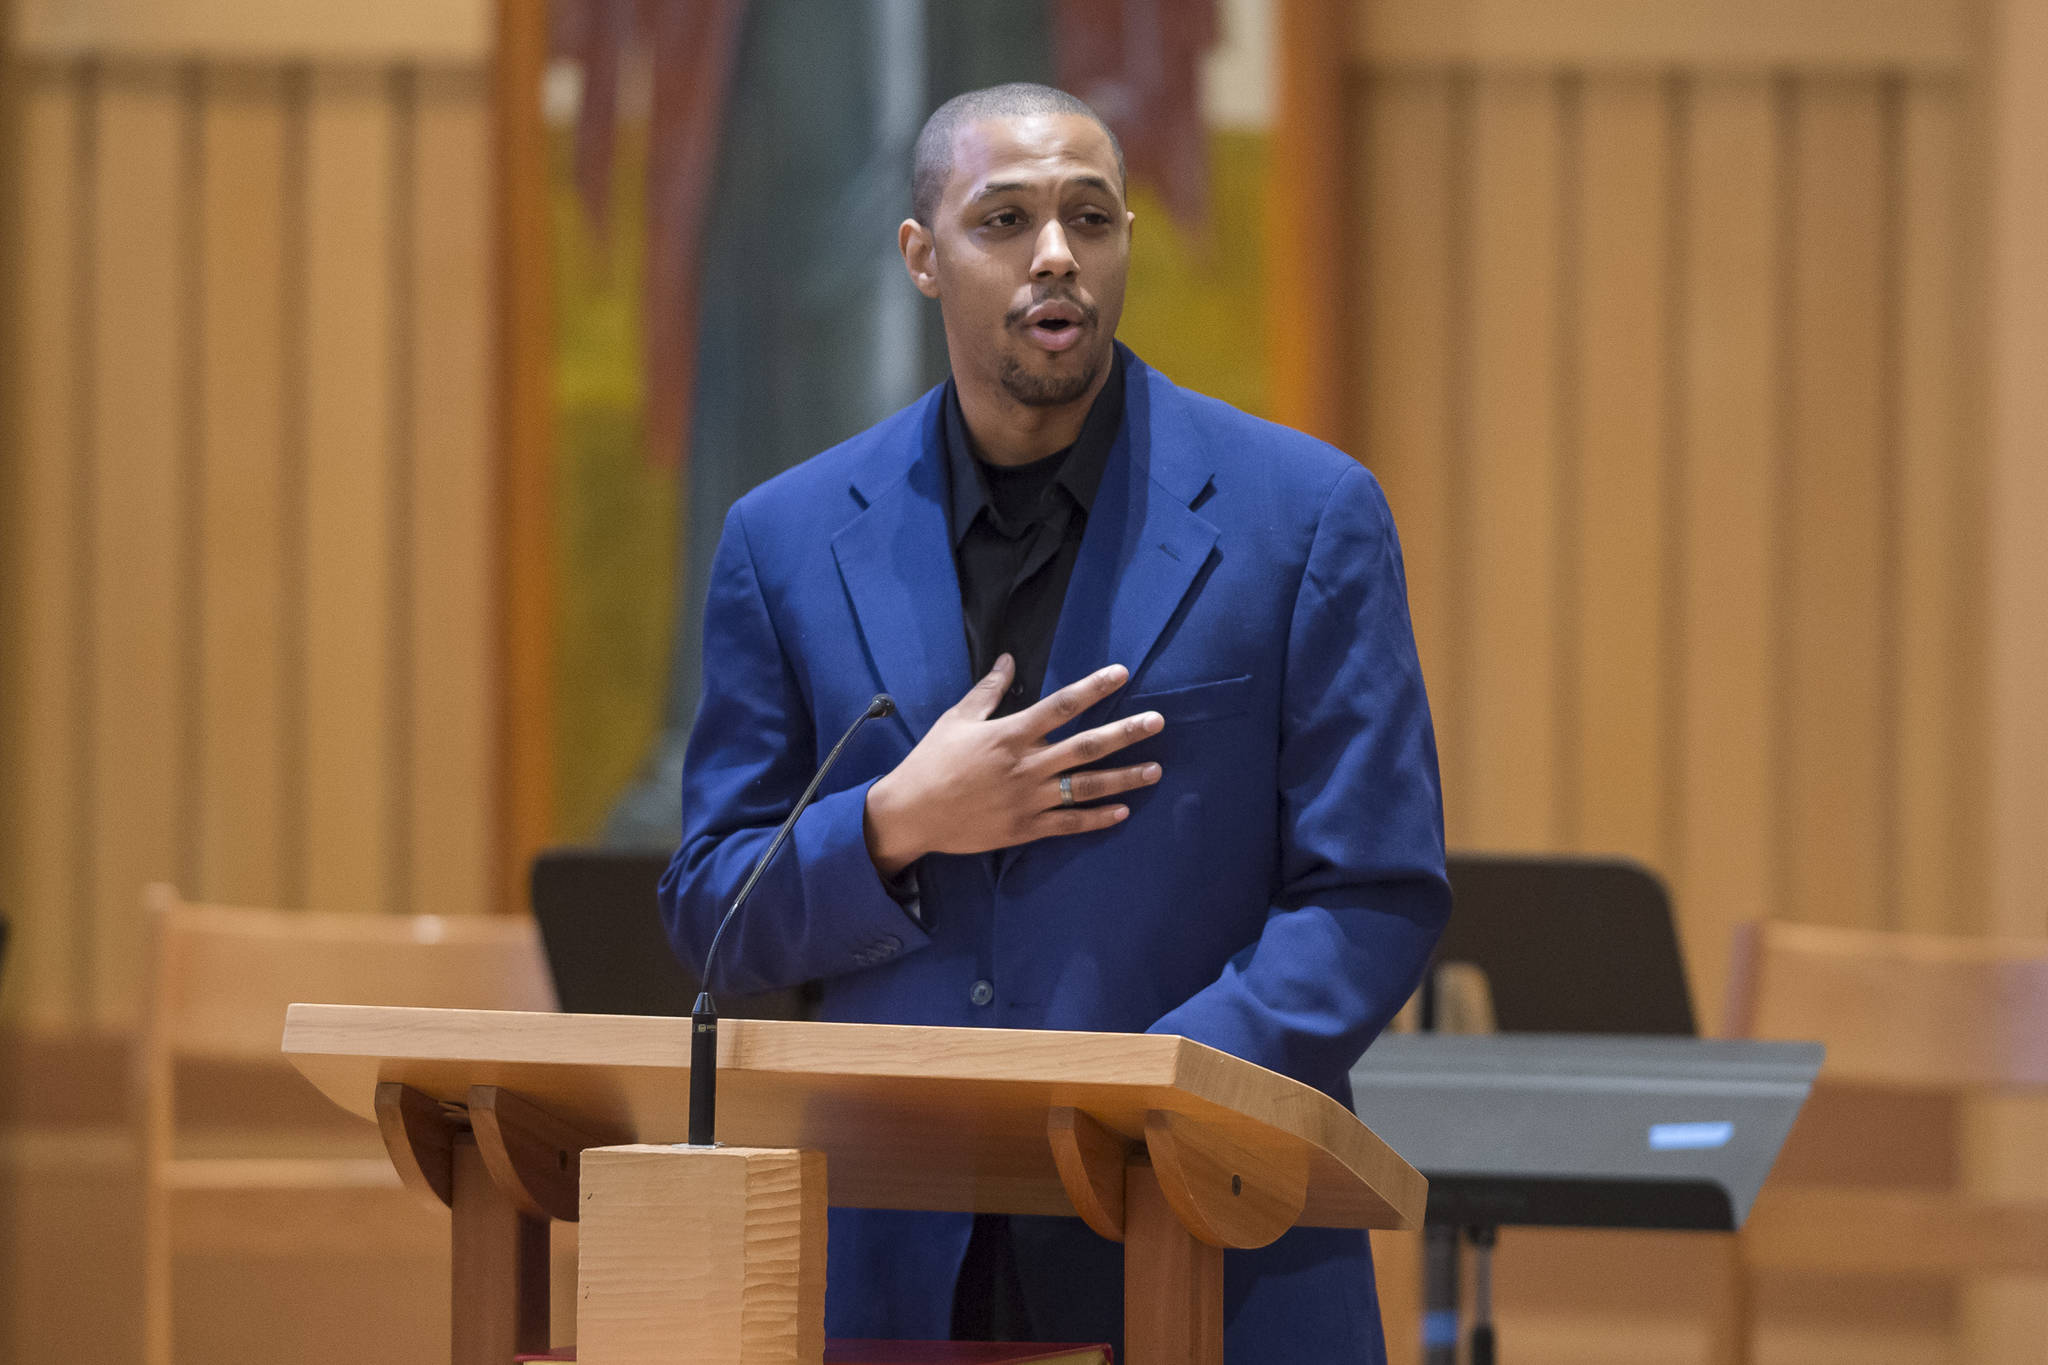 Michael Patterson, of the Black Awareness Association, speaks at the Dr. Martin Luther King Jr. 2019 Community Celebration at St. Paul’s Catholic Church on Monday, Jan. 21, 2019. (Michael Penn | Juneau Empire)